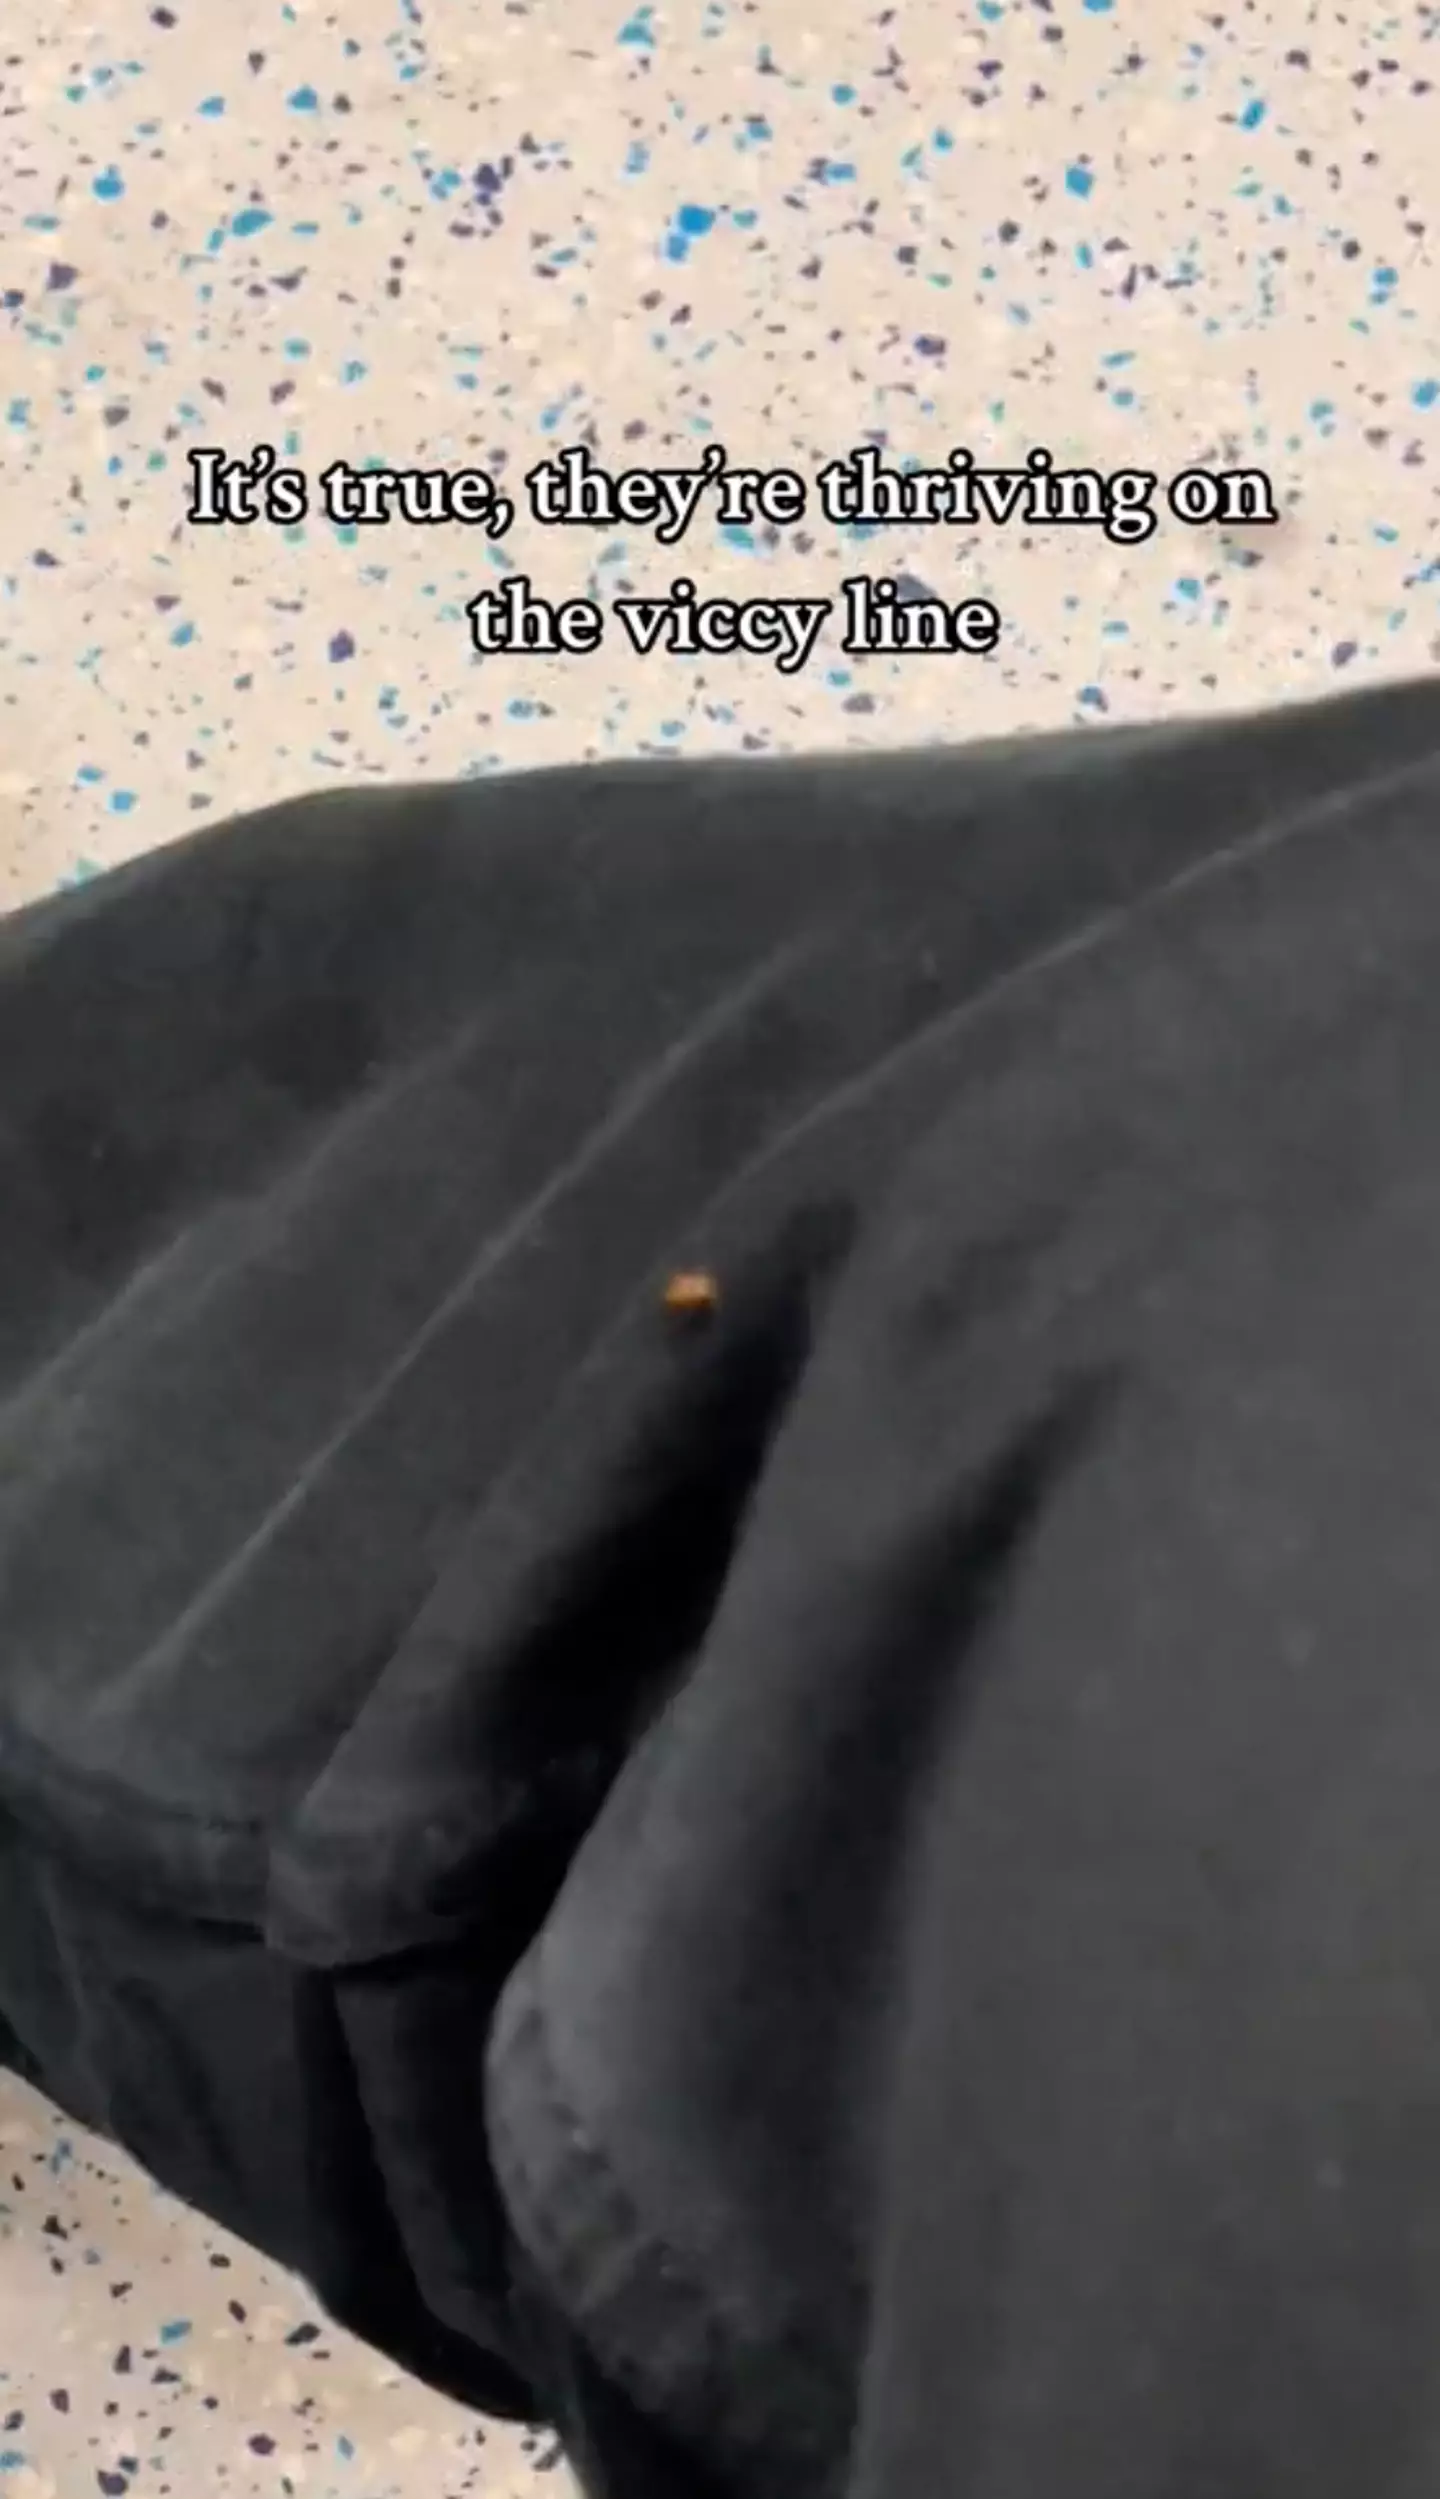 The woman shared what she claims is a bed bug crawling up her leg.